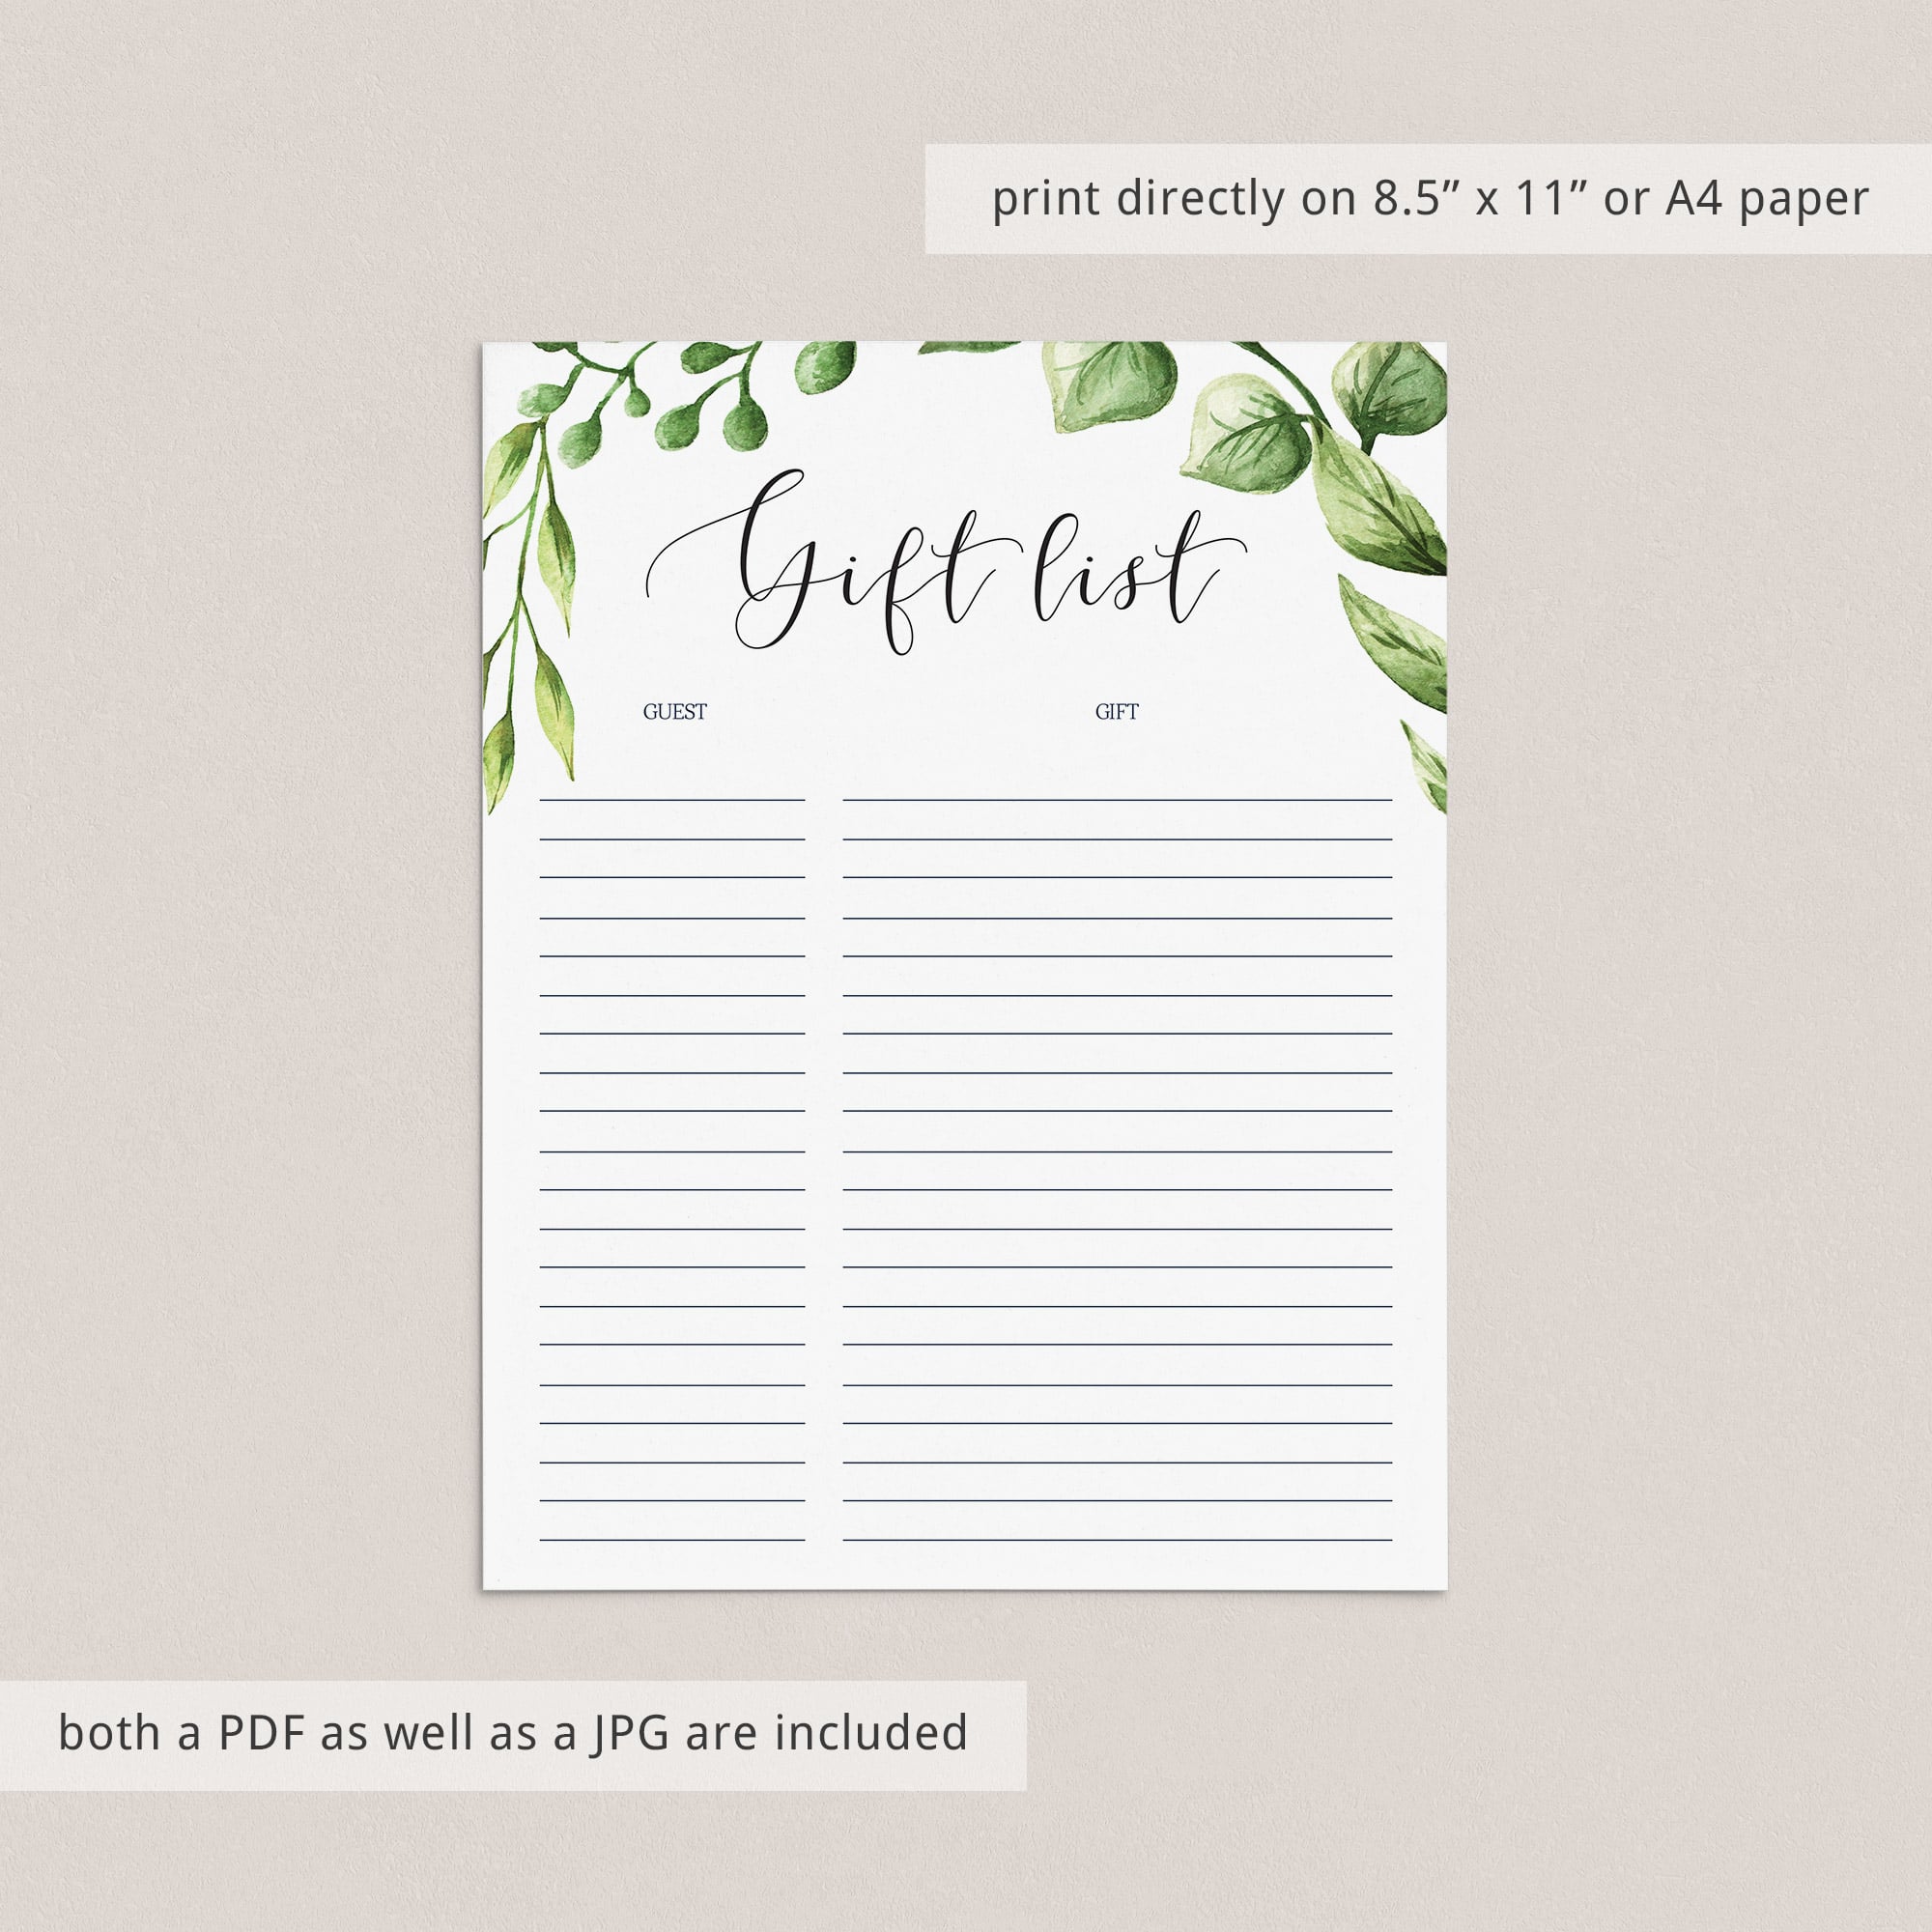 Instant download wedding gift list with greenery leaves by LittleSizzle